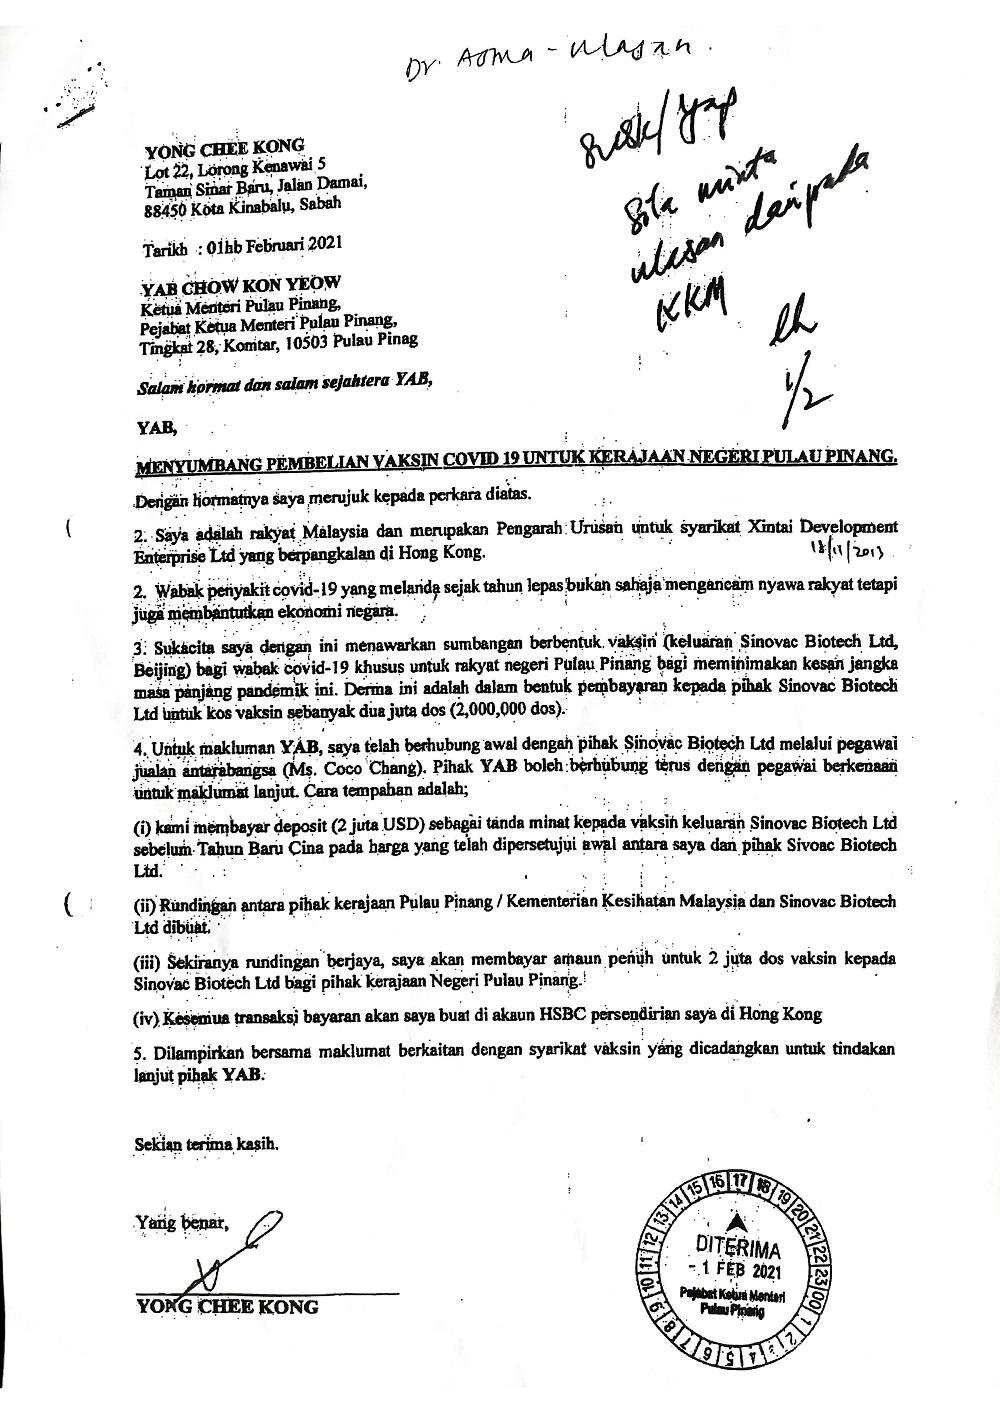 A copy of the letter sent by Xintai Development Enterprise Ltd to Penang Chief Minister Chow Kon Yeow offering two million doses of Sinovac vaccine.